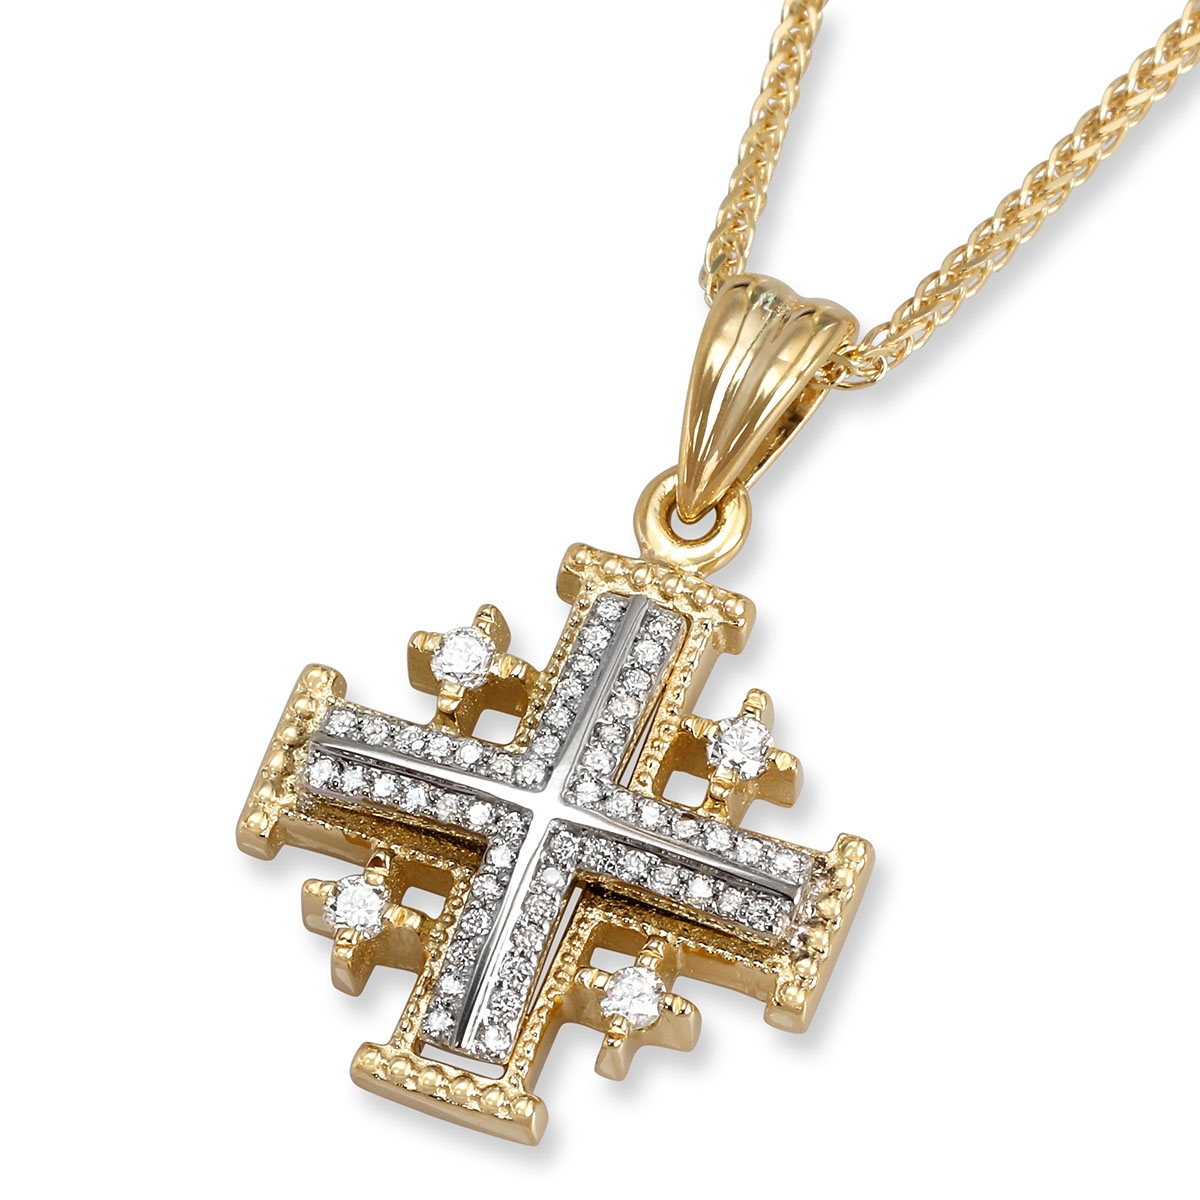 Anbinder Two-Tone 14K Yellow and White Gold Milgrain Jerusalem Cross Pendant with Bilateral Diamond Rows - 1